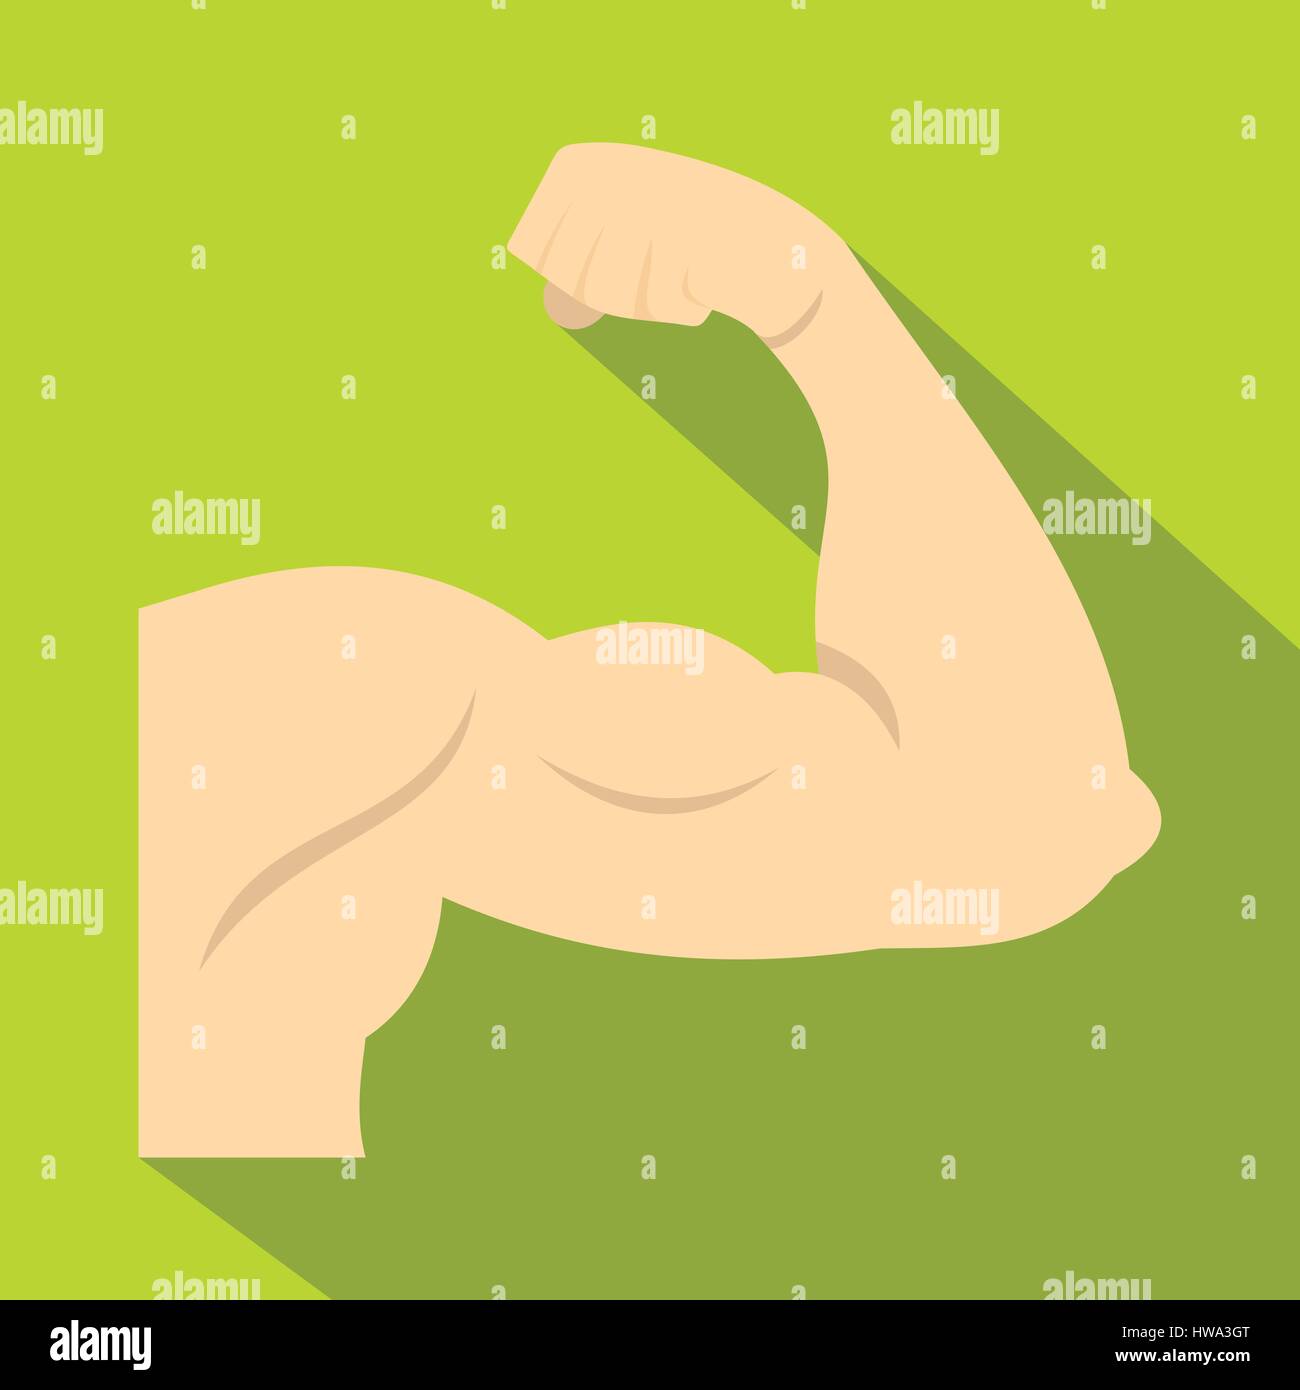 Arm showing biceps muscle icon, flat style Stock Vector